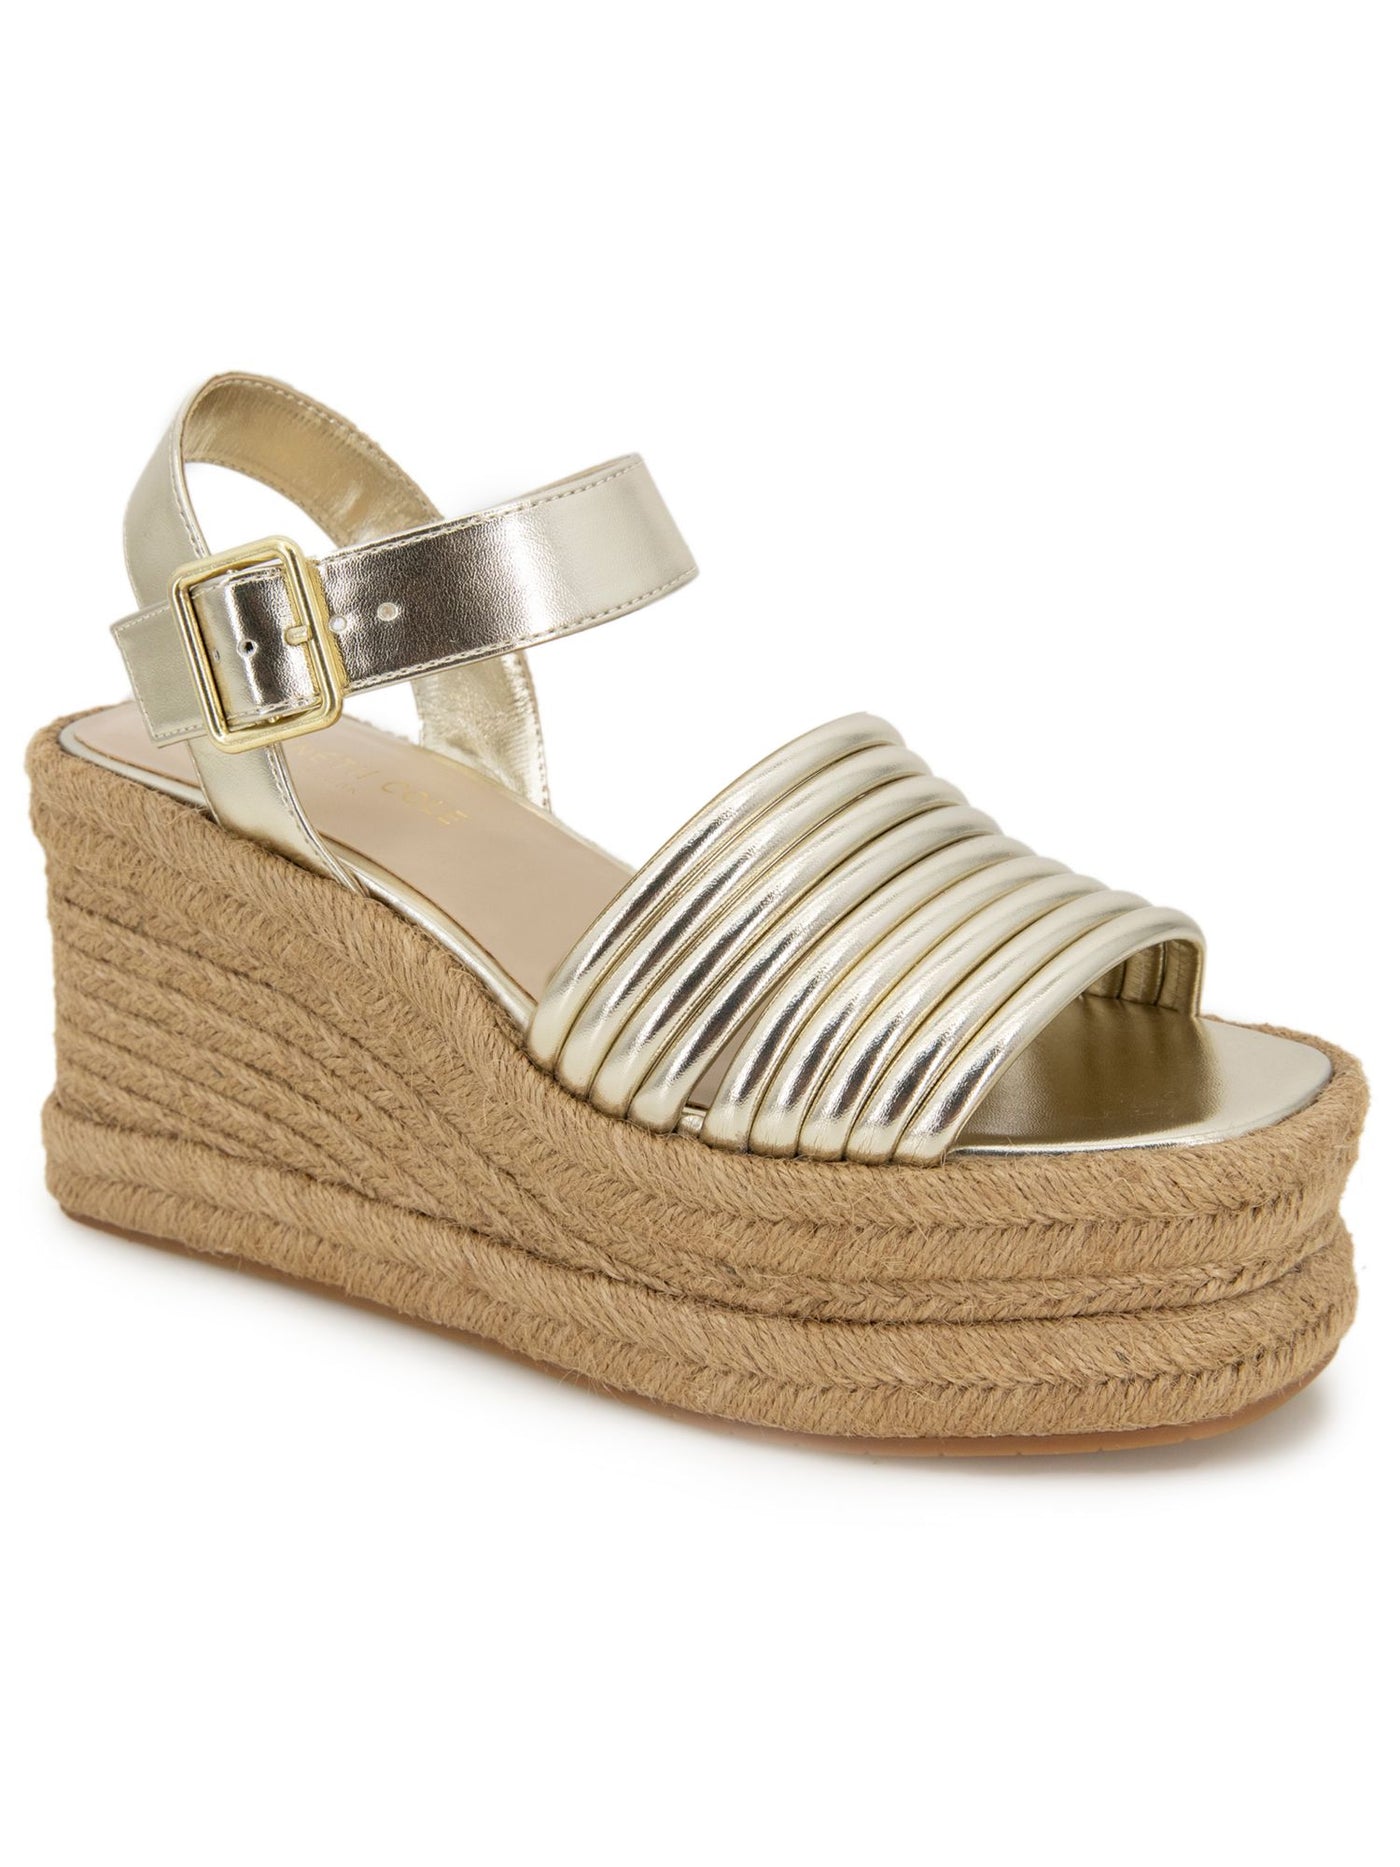 KENNETH COLE NEW YORK Womens Gold 2 Wedge Adjustable Ankle Strap Strappy Padded Shelby Open Toe Wedge Buckle Espadrille Shoes 9 M